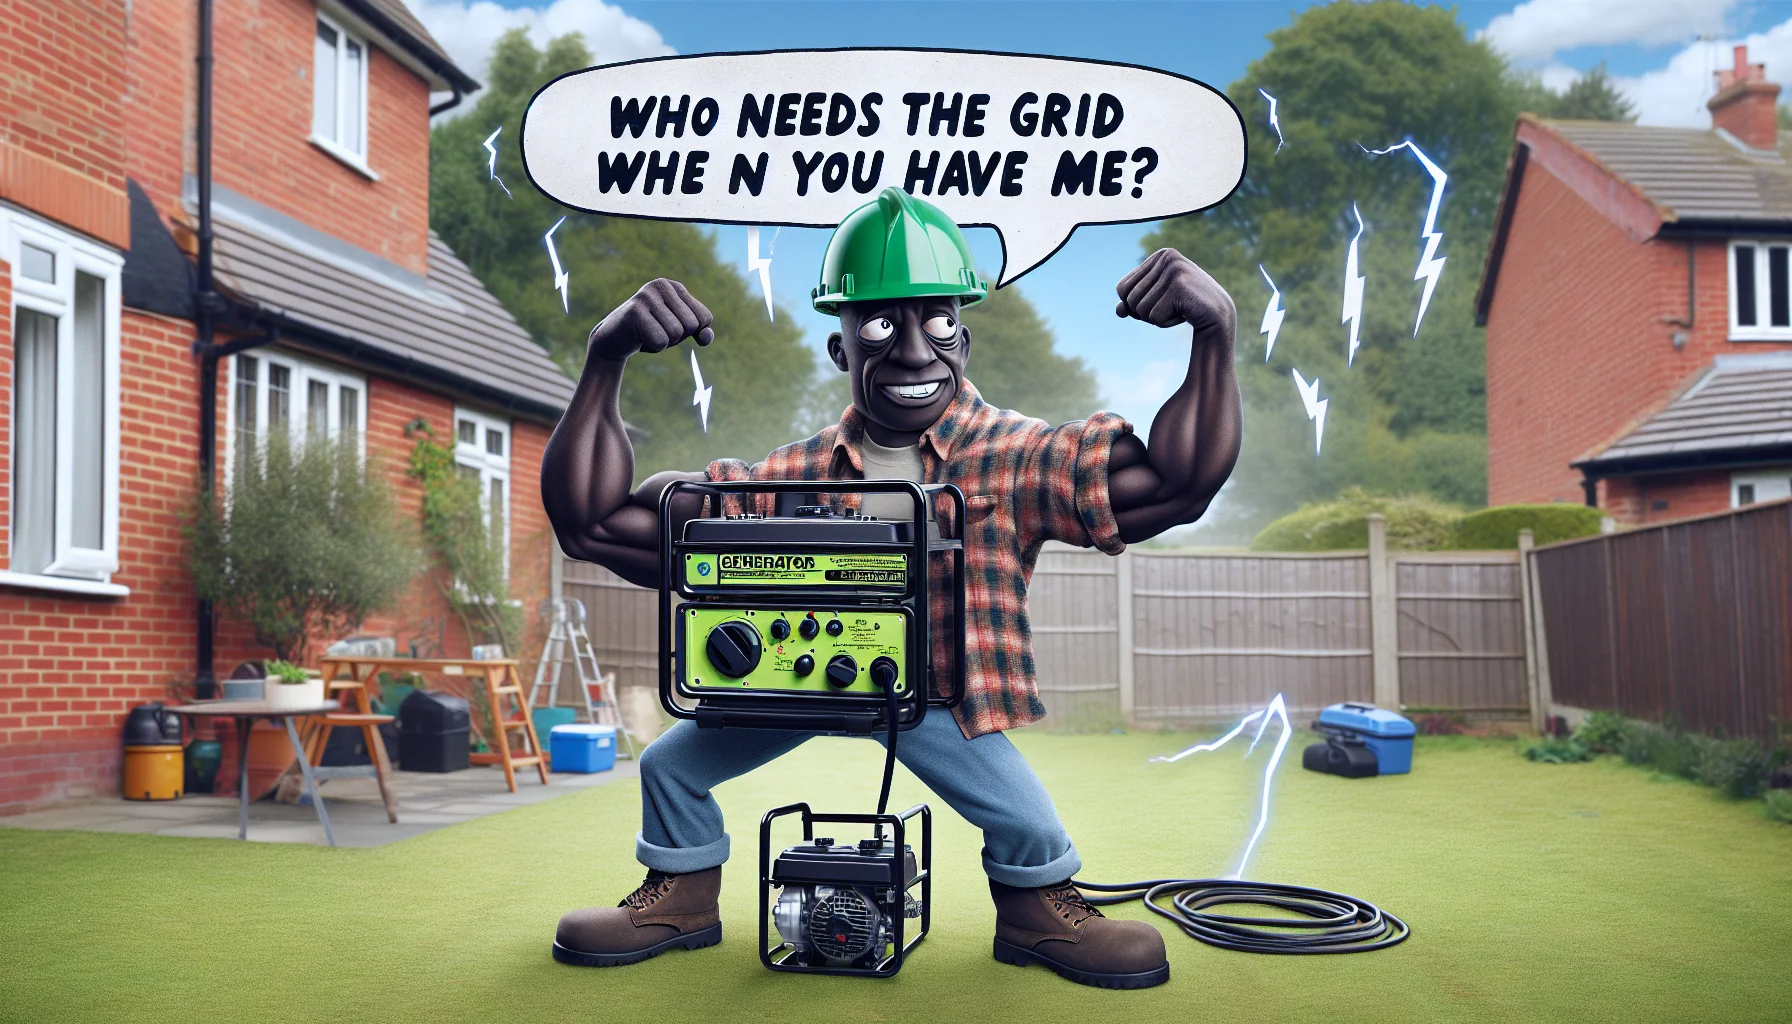 Create a detailed, humor-filled scene of a middle-aged, Black male, donning a green safety helmet and a flannel shirt, working with a portable generator in a suburban backyard. The generator is anthropomorphized and is making a humorous 'flexing muscles' pose, with a comic bubble emerging from it that contains the text 'Who needs the grid when you have me?'. Flying around it are tiny lightning bolts, representing electricity. This image should suggest an inviting and entertaining atmosphere around generating electricity at home.